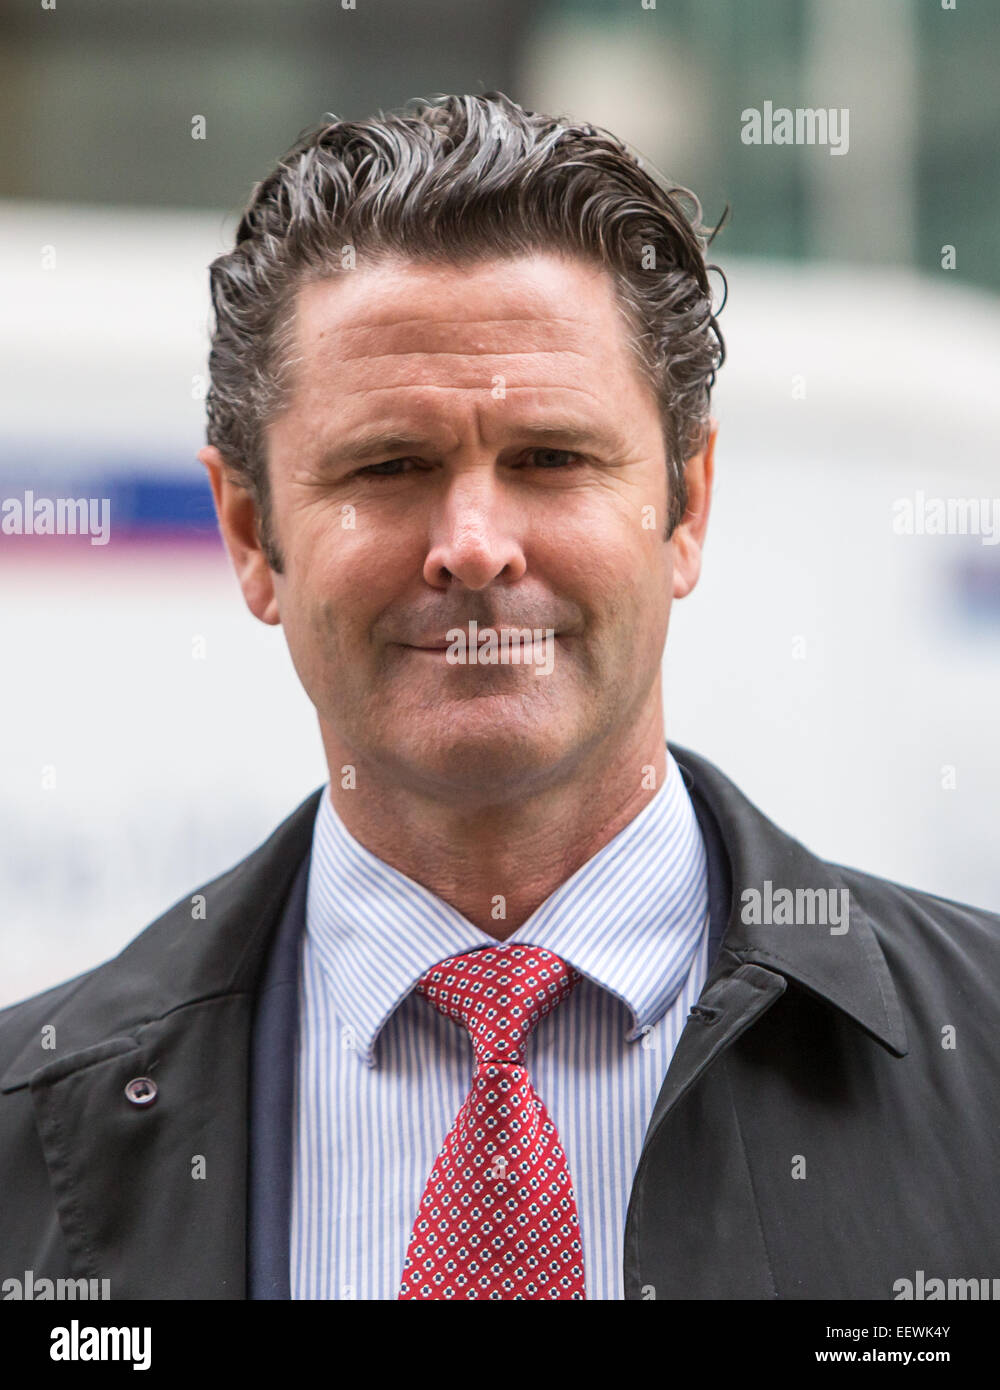 Chris Cairns former New Zealand cricketer and all rounder outside The Old Bailey in London answering charges of match fixing Stock Photo